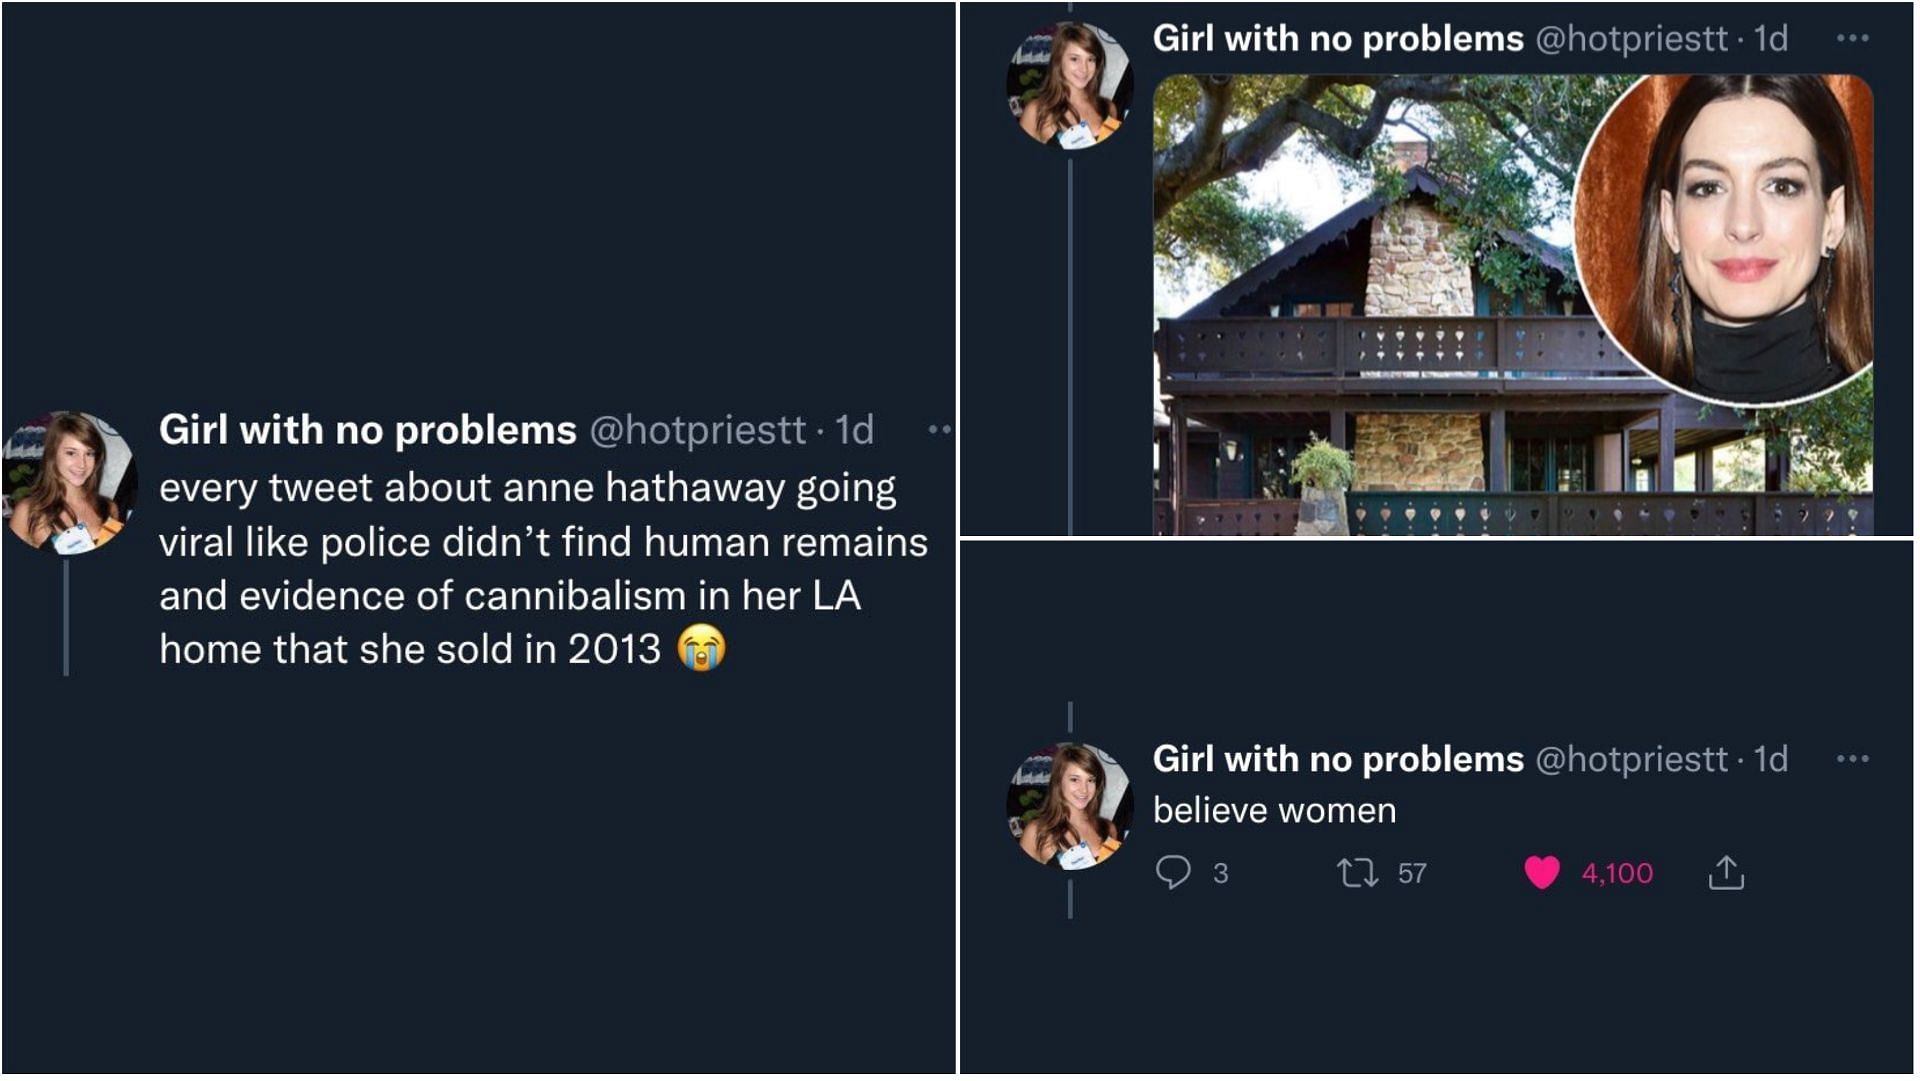 The controversial tweet by Girl with no problems (Image via hotpriestt/Twitter)